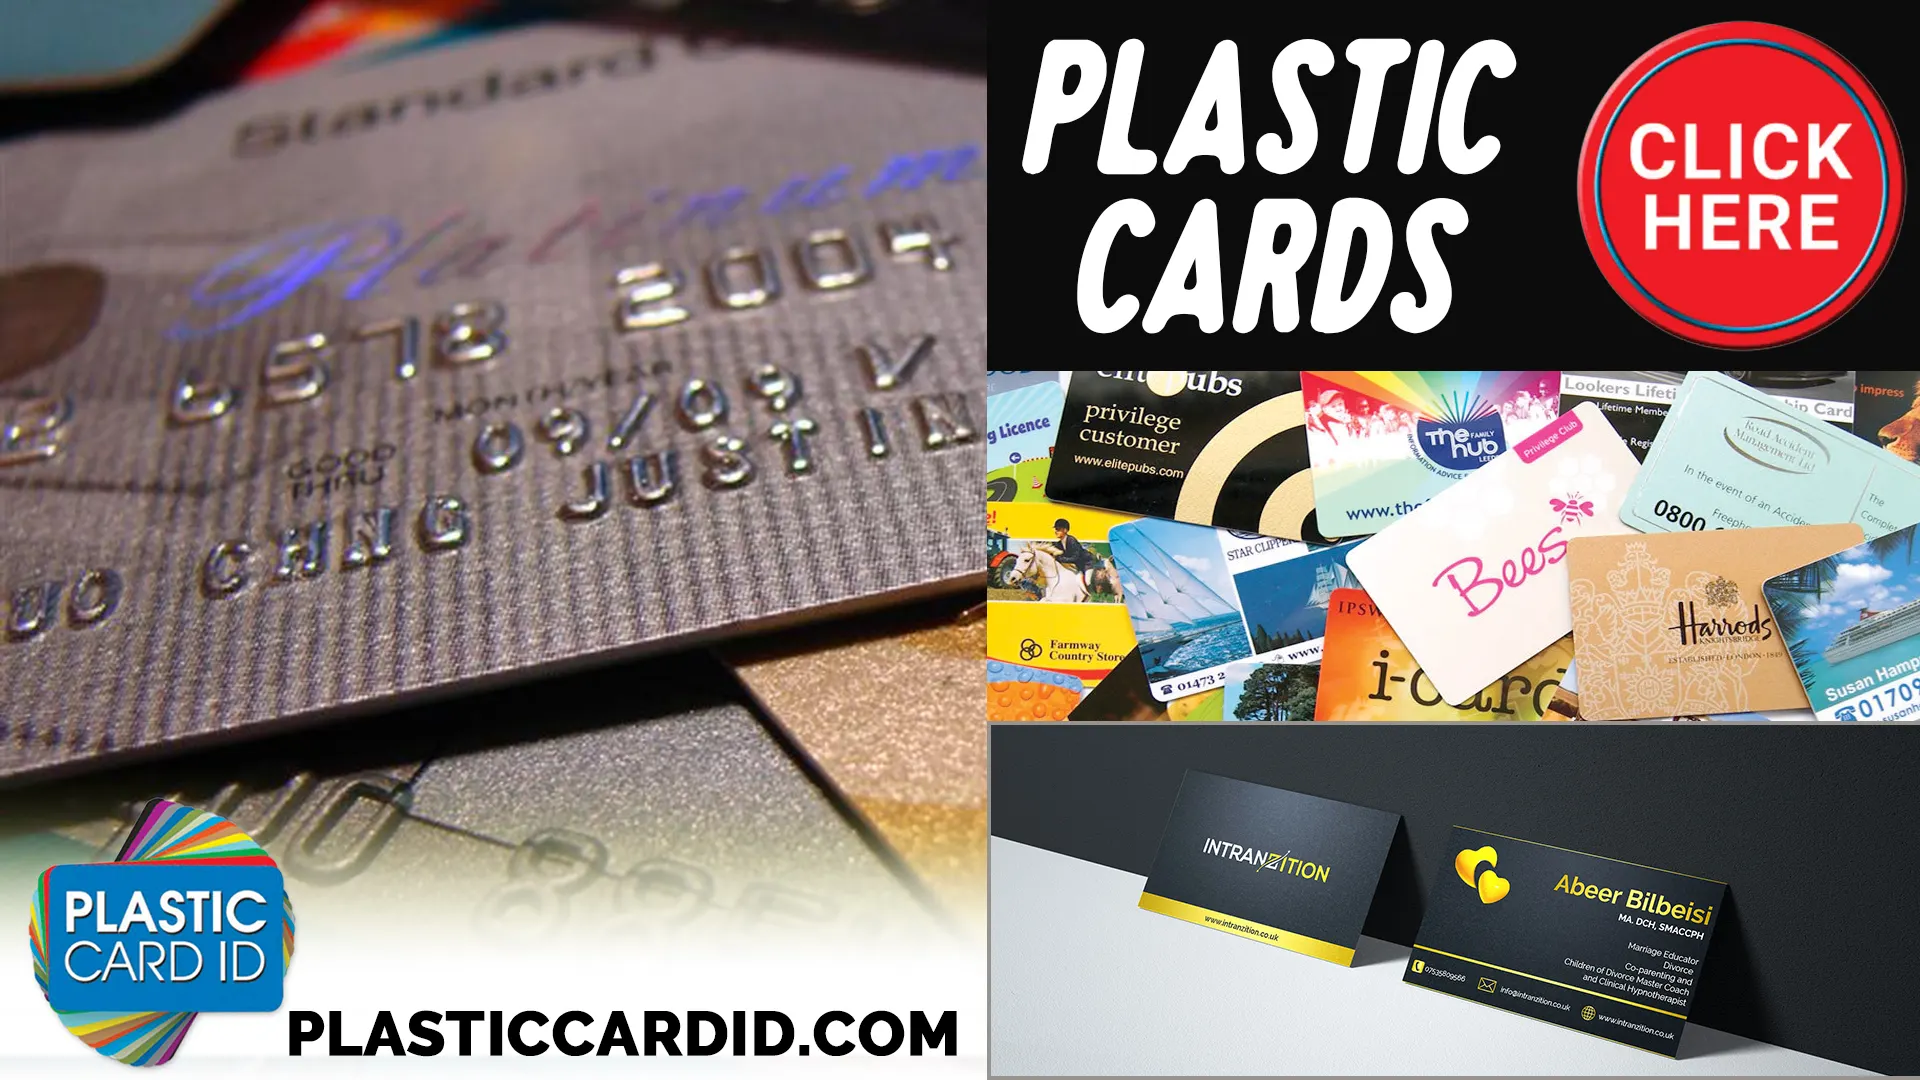  Cutting-Edge Card Printers and Supplies at Plastic Card ID




 